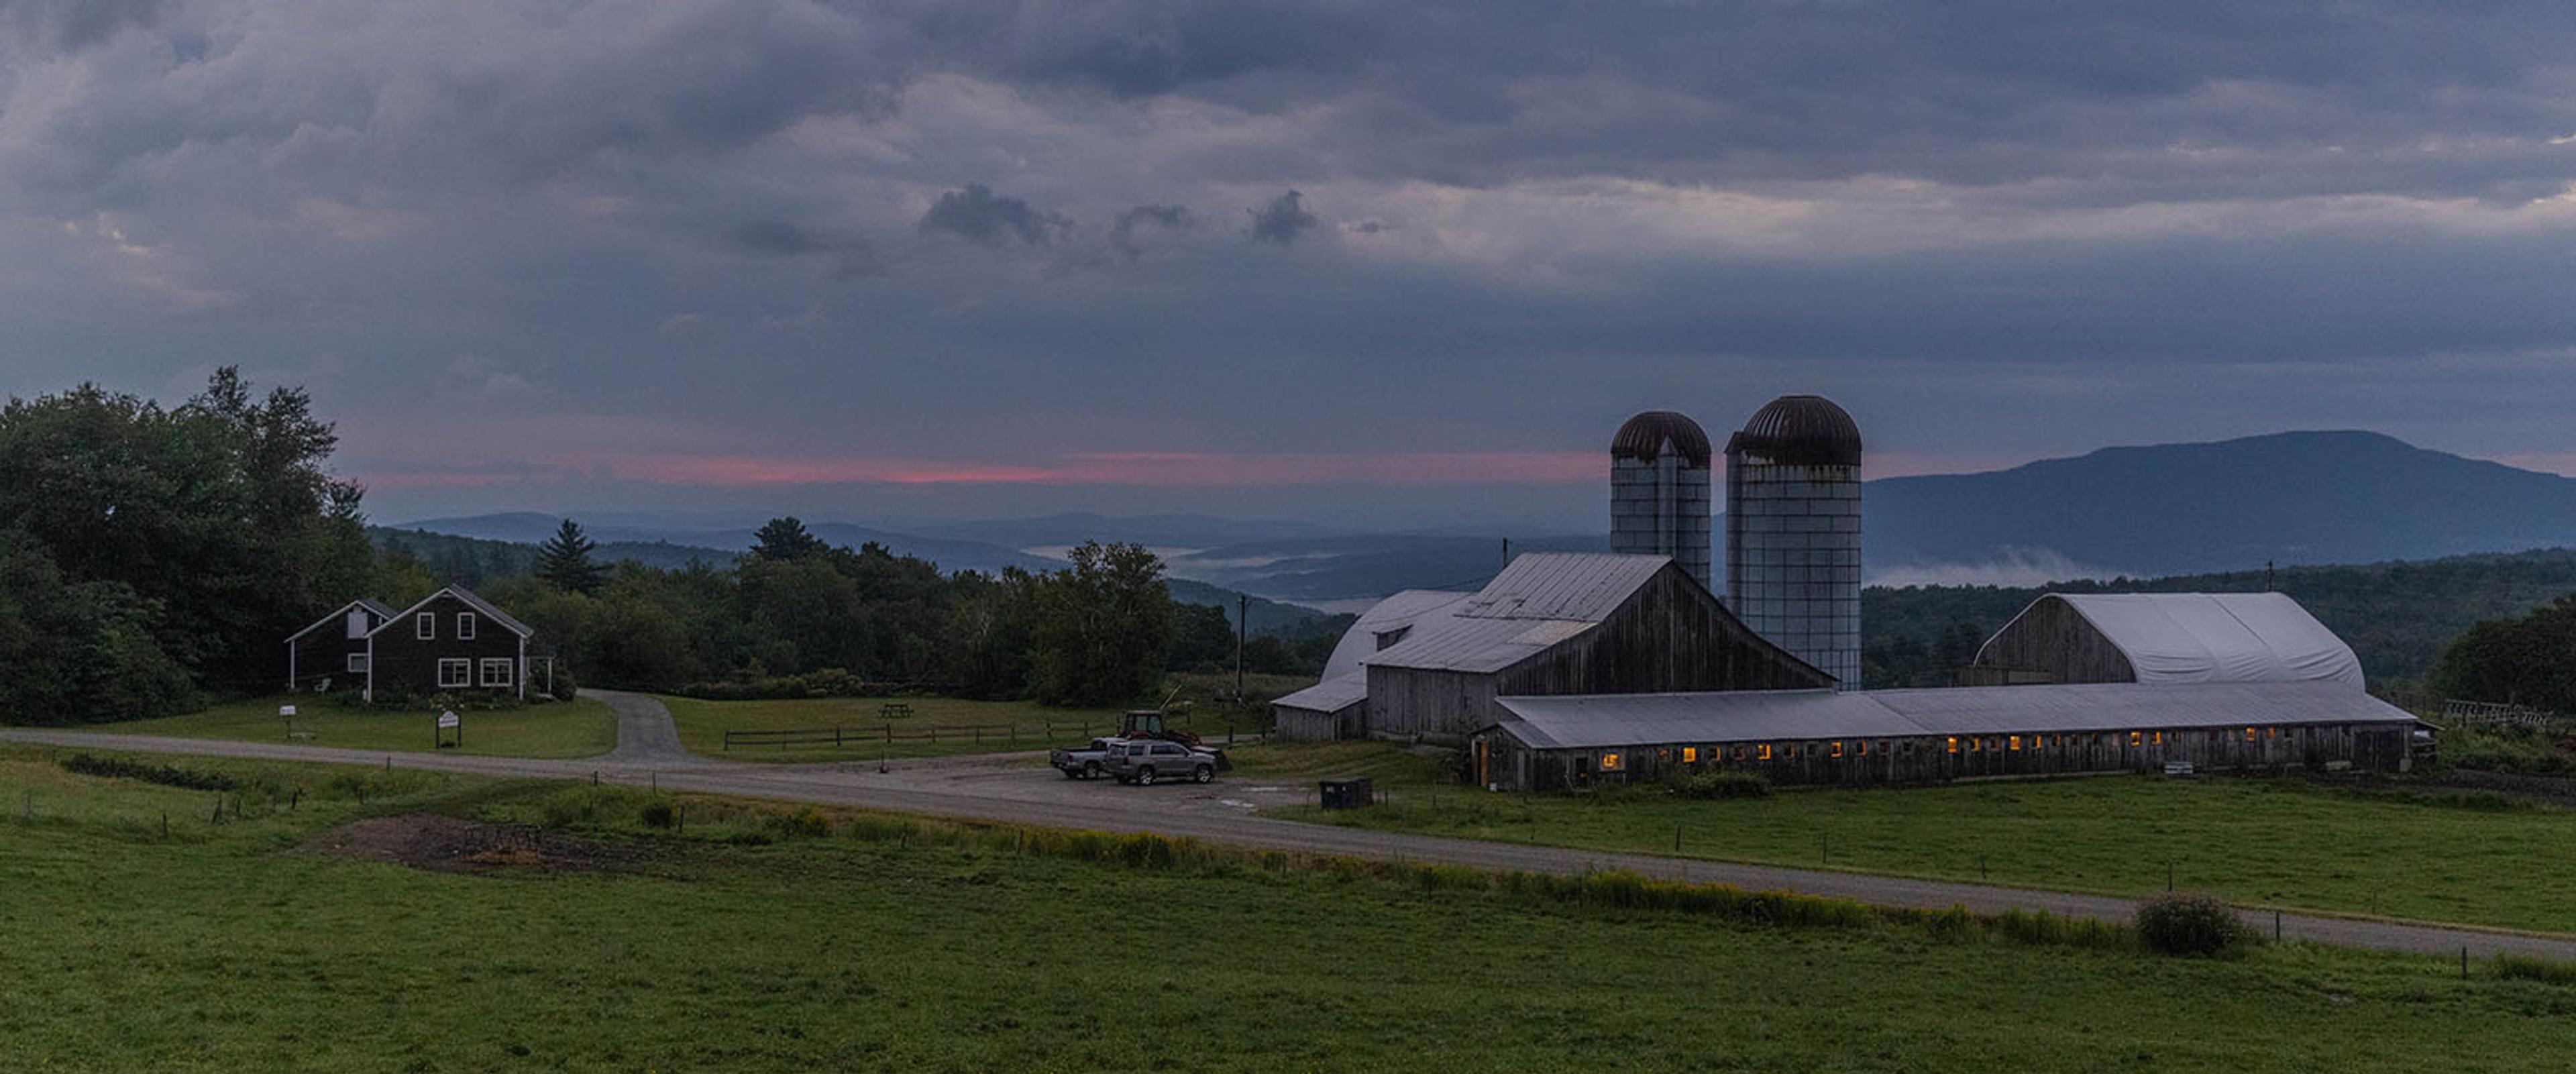 The Rooney farm in Vermont has mountains in the backdrop.